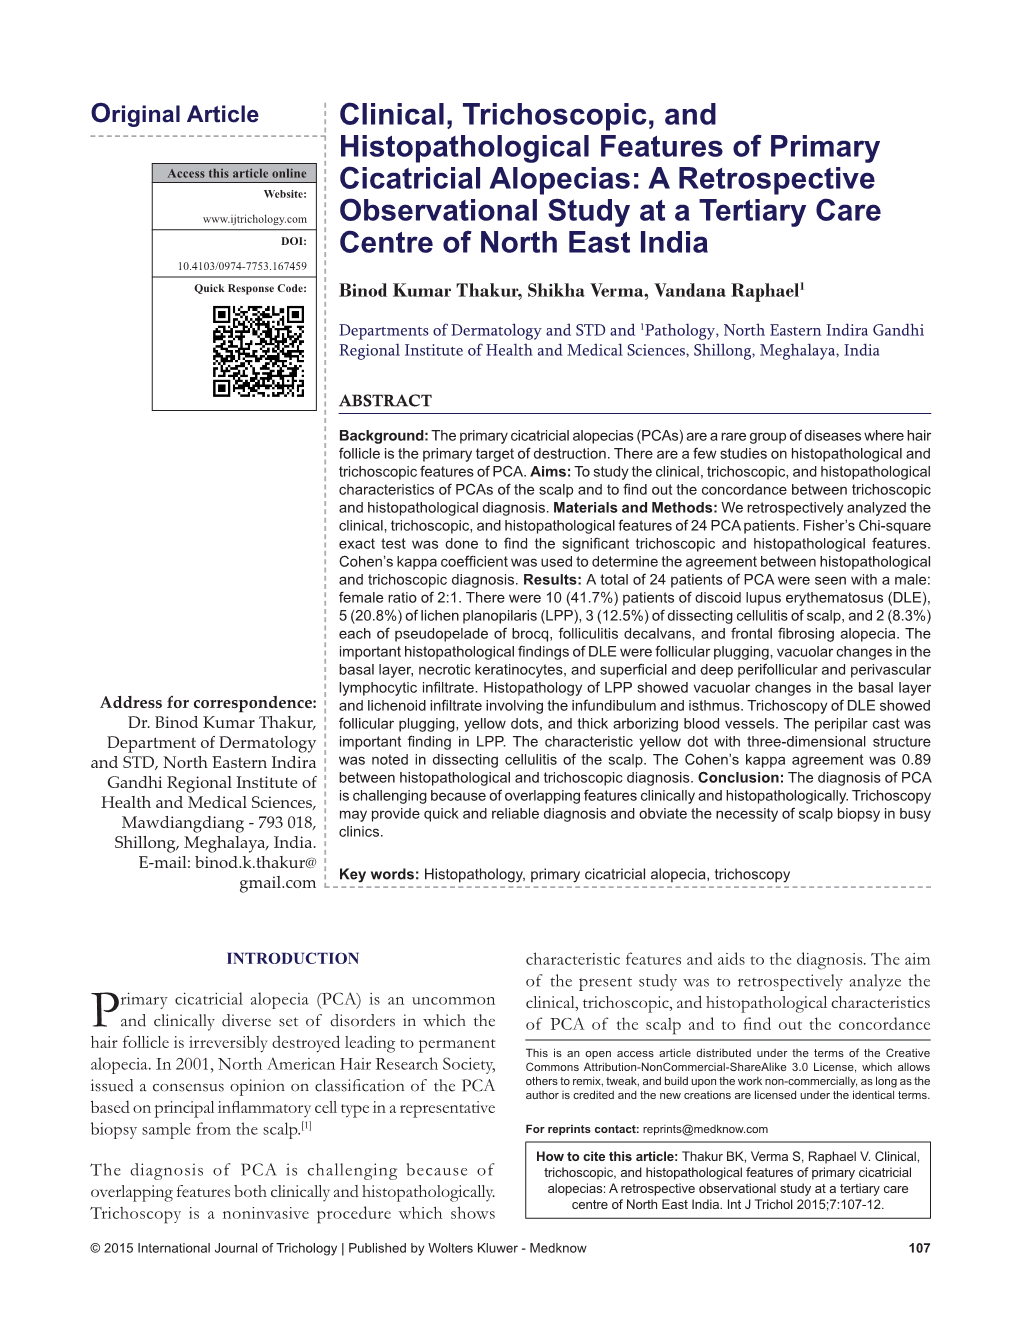 Clinical, Trichoscopic, and Histopathological Features of Primary Cicatricial Alopecias